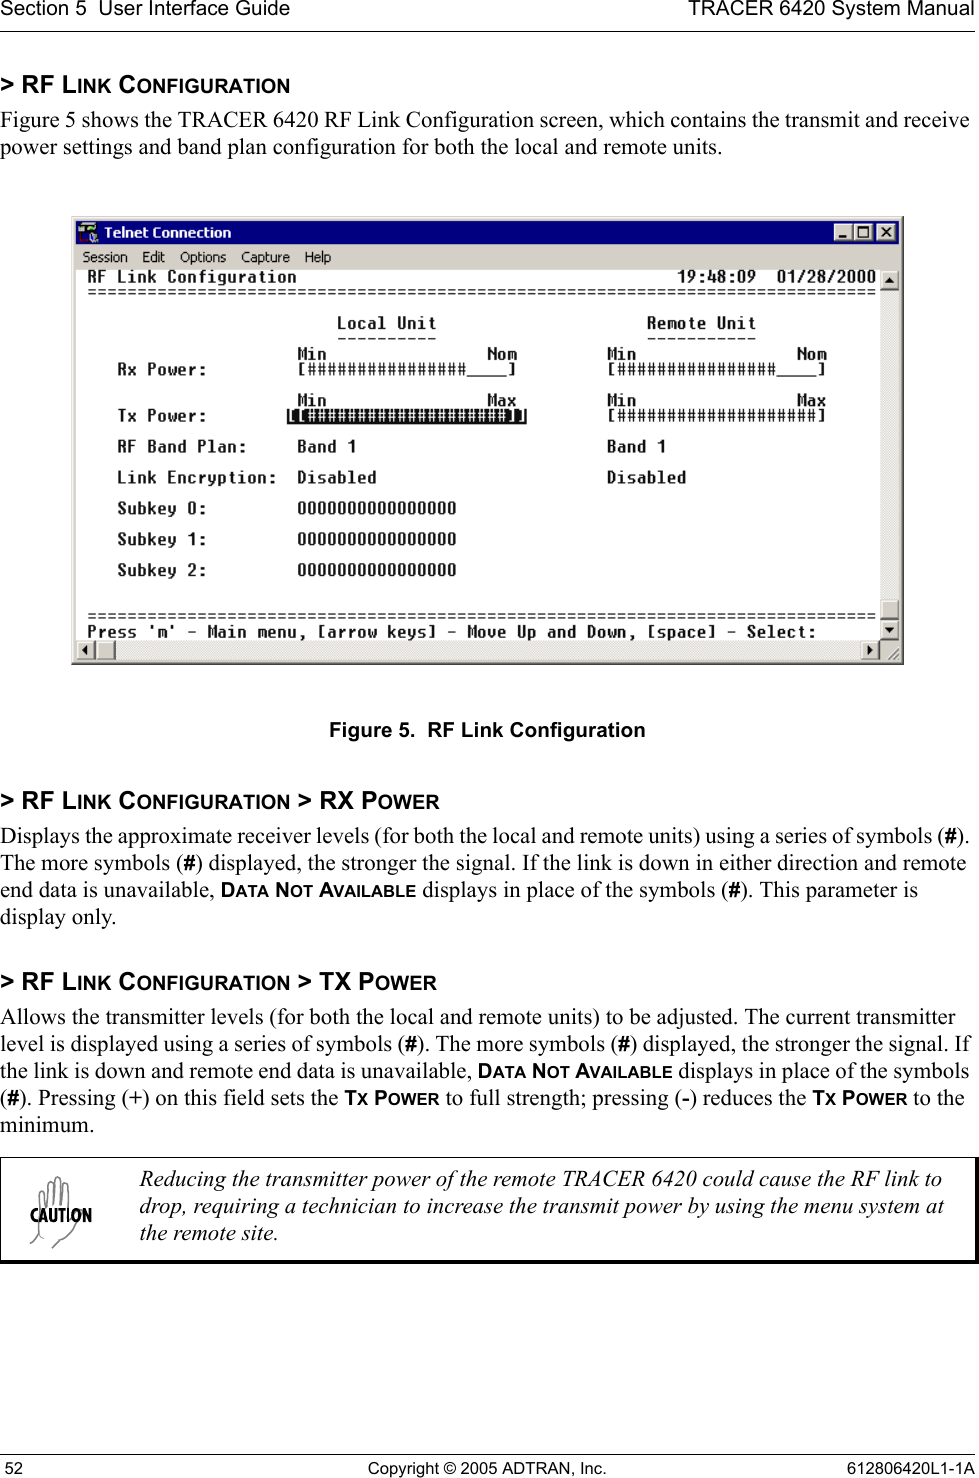 Section 5  User Interface Guide TRACER 6420 System Manual 52 Copyright © 2005 ADTRAN, Inc. 612806420L1-1A&gt; RF LINK CONFIGURATIONFigure 5 shows the TRACER 6420 RF Link Configuration screen, which contains the transmit and receive power settings and band plan configuration for both the local and remote units.Figure 5.  RF Link Configuration&gt; RF LINK CONFIGURATION &gt; RX POWERDisplays the approximate receiver levels (for both the local and remote units) using a series of symbols (#). The more symbols (#) displayed, the stronger the signal. If the link is down in either direction and remote end data is unavailable, DATA NOT AVAILABLE displays in place of the symbols (#). This parameter is display only. &gt; RF LINK CONFIGURATION &gt; TX POWERAllows the transmitter levels (for both the local and remote units) to be adjusted. The current transmitter level is displayed using a series of symbols (#). The more symbols (#) displayed, the stronger the signal. If the link is down and remote end data is unavailable, DATA NOT AVAILABLE displays in place of the symbols (#). Pressing (+) on this field sets the TX POWER to full strength; pressing (-) reduces the TX POWER to the minimum. Reducing the transmitter power of the remote TRACER 6420 could cause the RF link to drop, requiring a technician to increase the transmit power by using the menu system at the remote site.